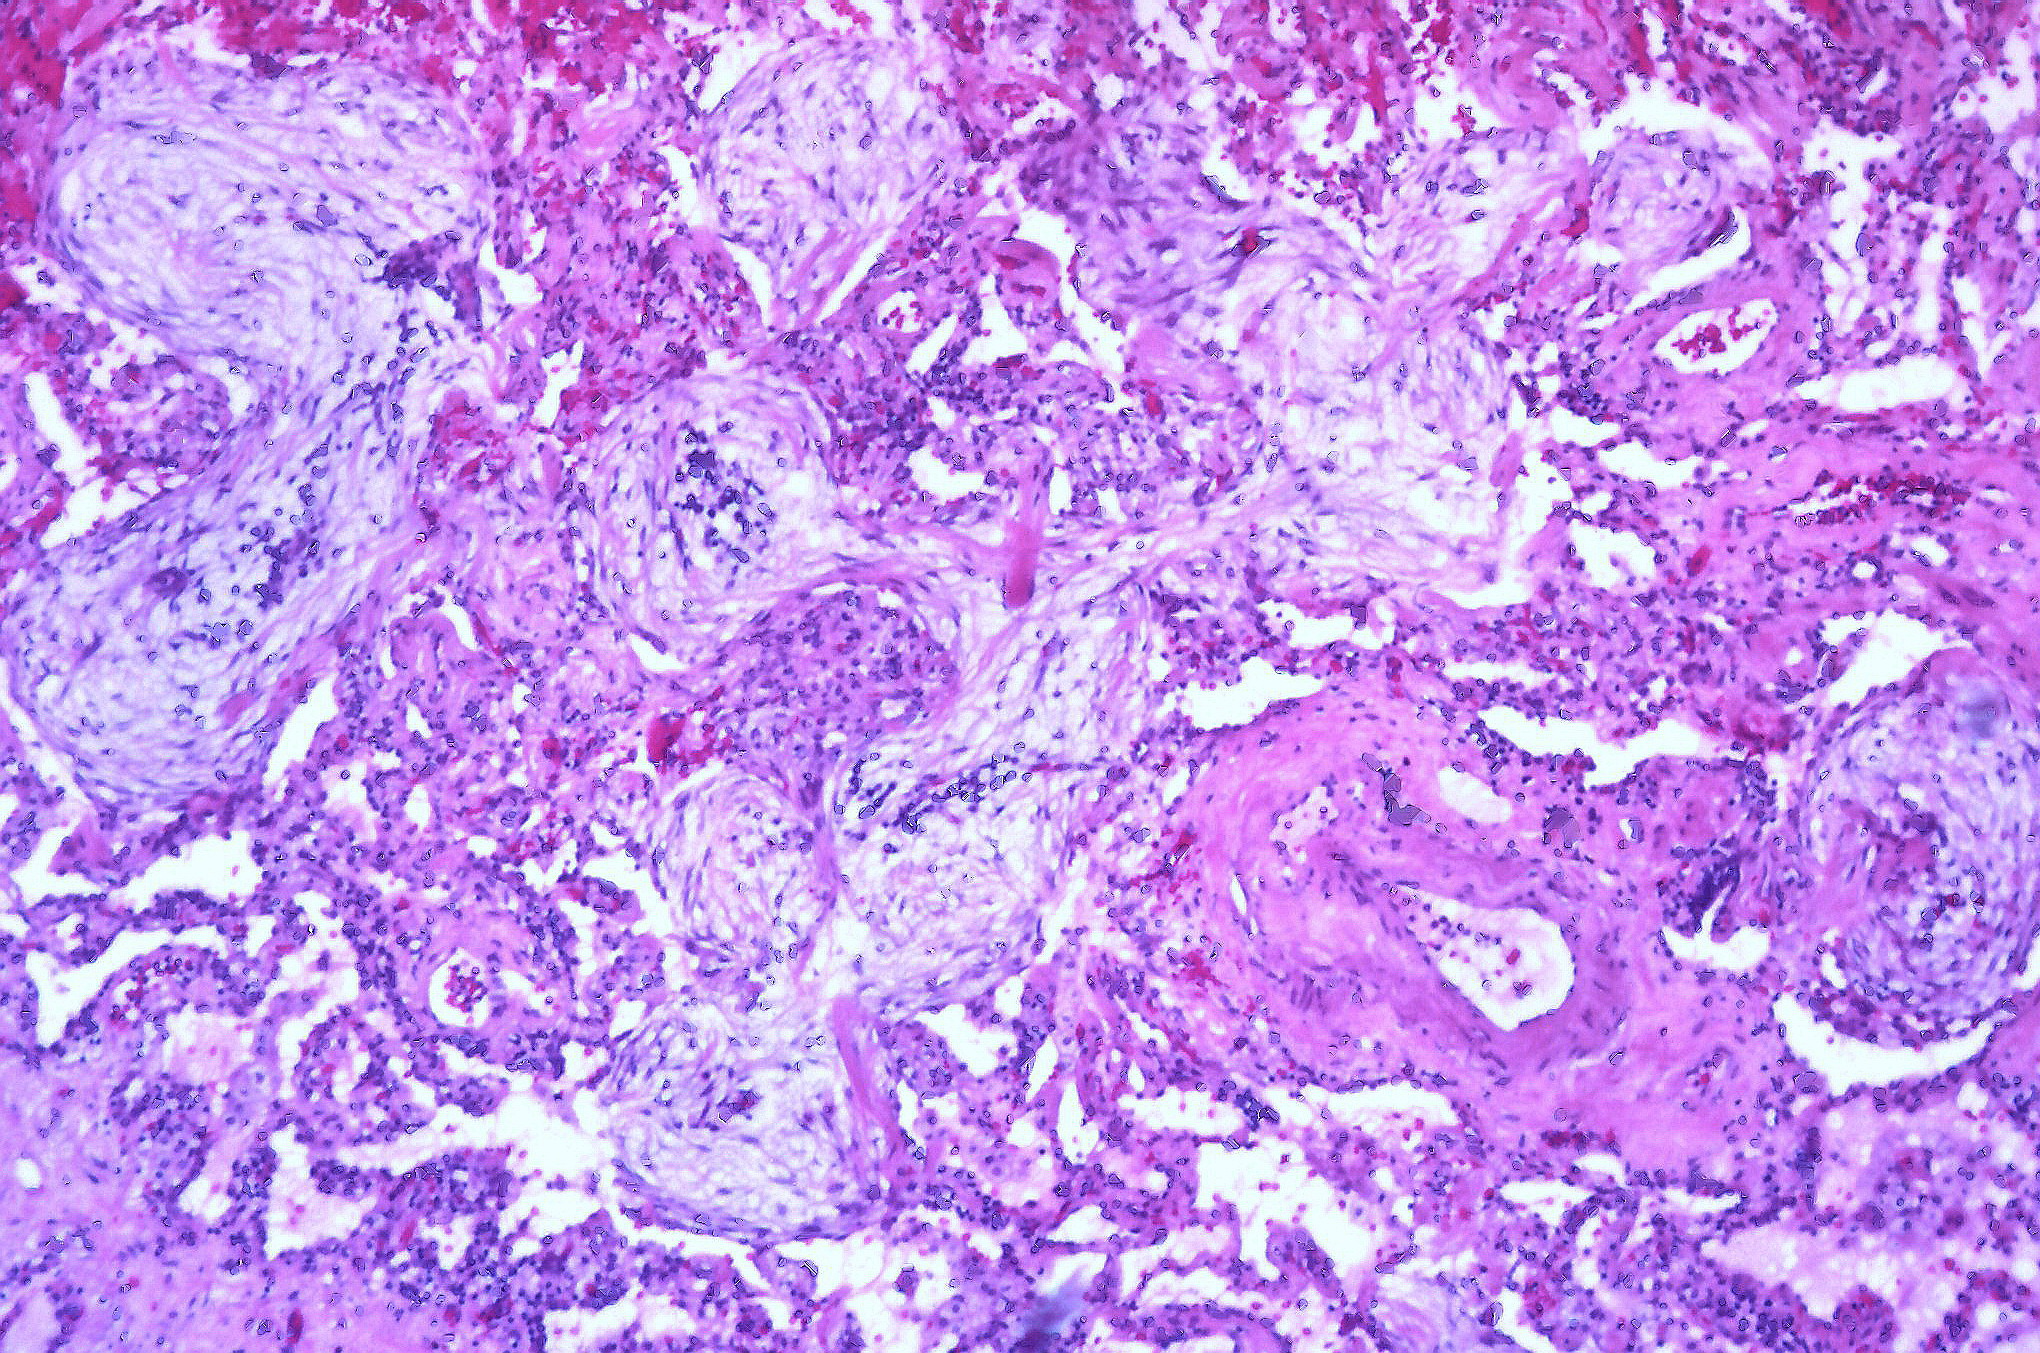 Histological slide of airspaces filled with fibrotic lesions. fibrotic material occupies the airspaces and transitions from one alveolus to the next generating a pattern of conjoined circles within the view.